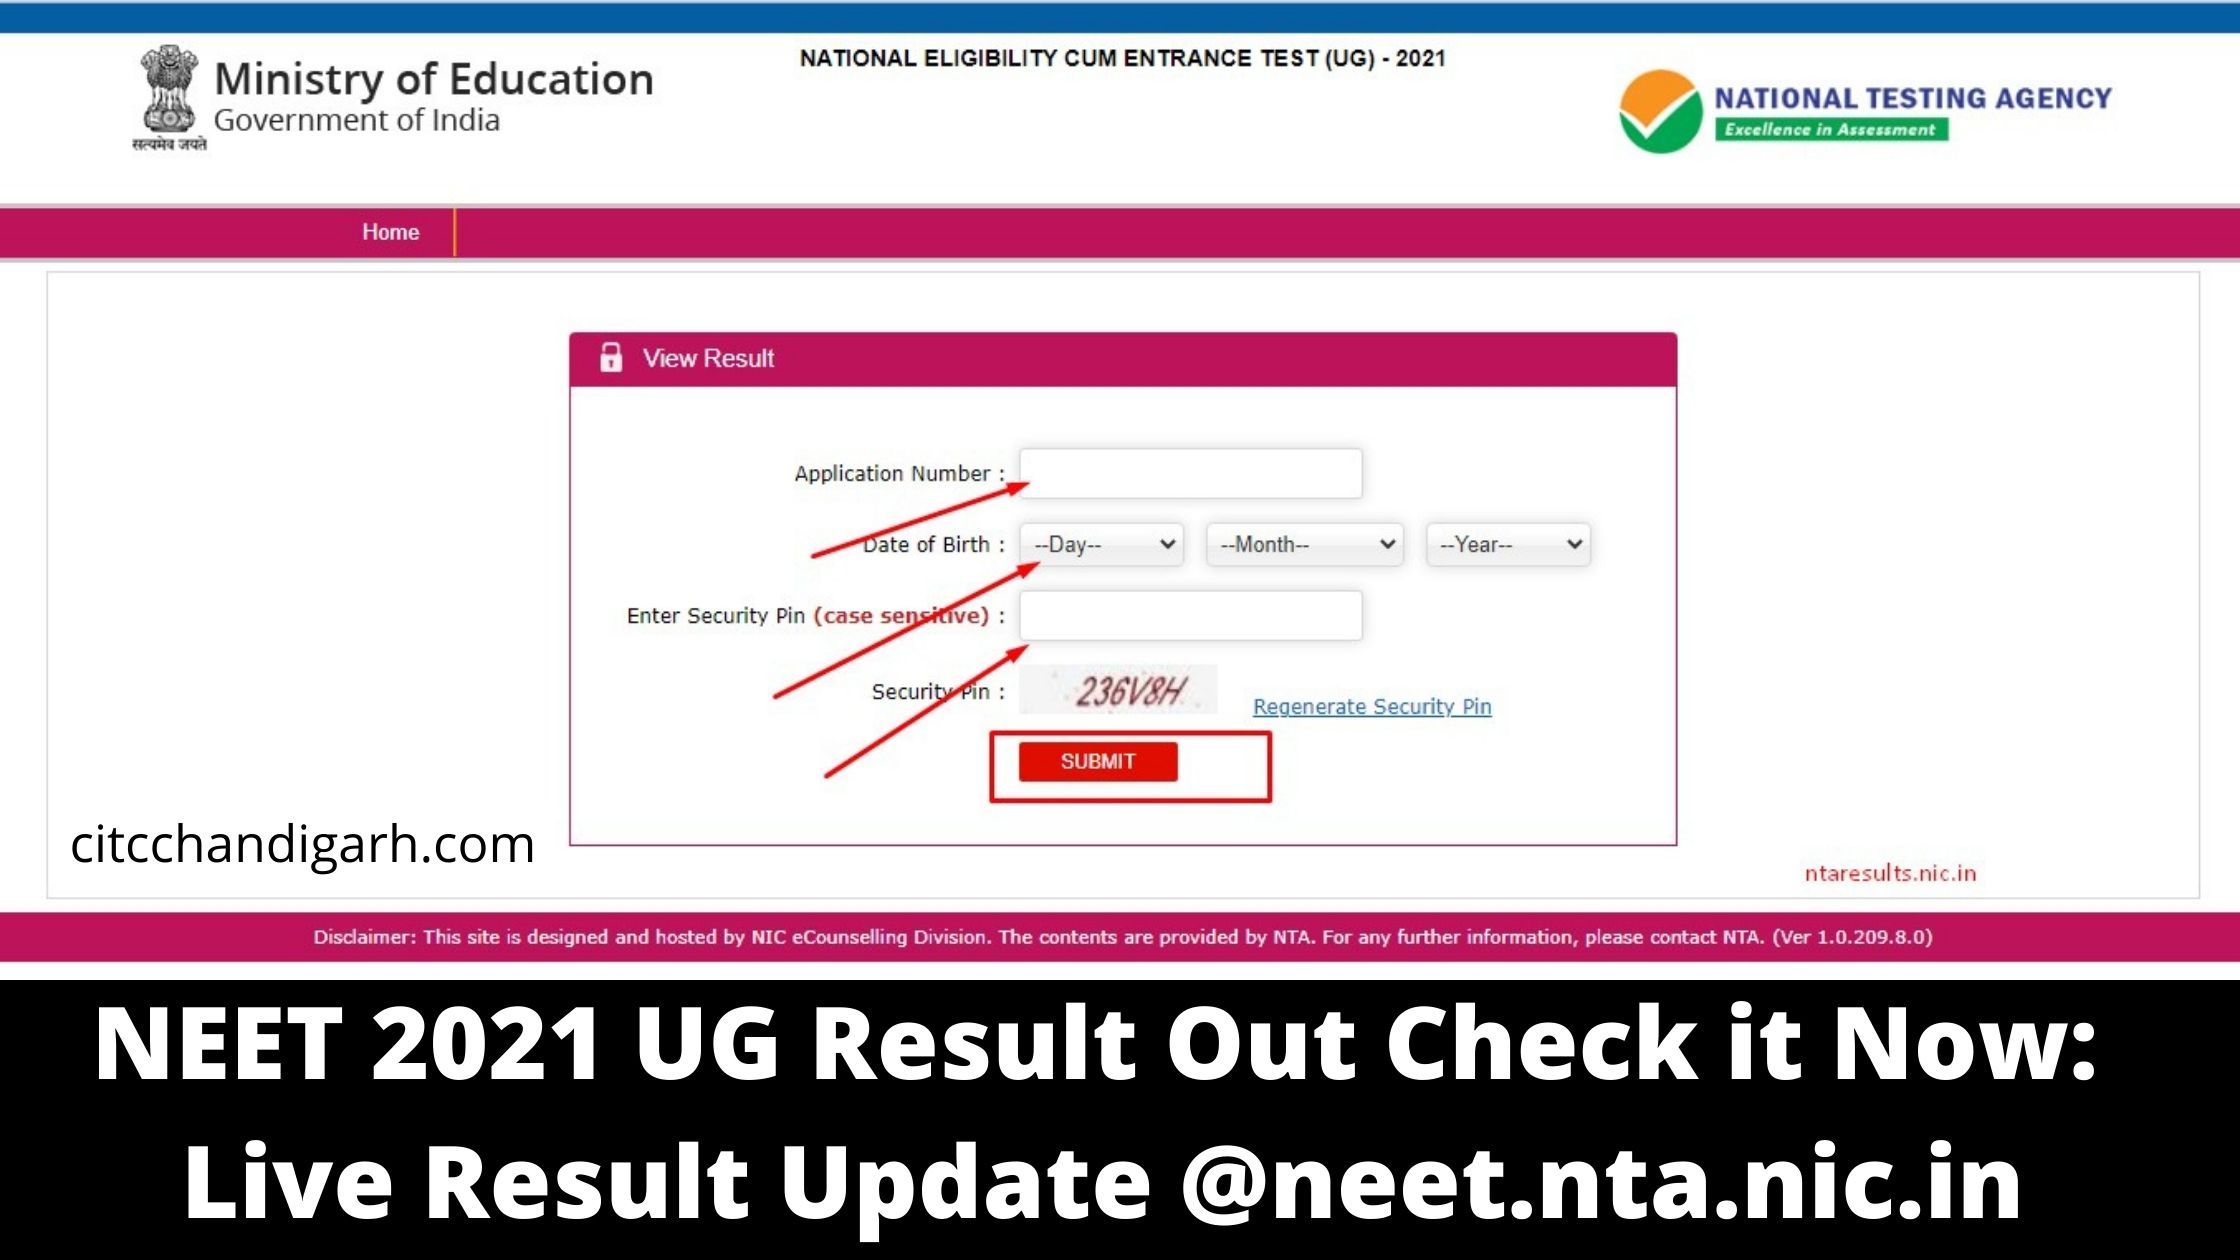 NEET 2021 UG Result Out Check it Now: Live Result Update @neet.nta.nic.in